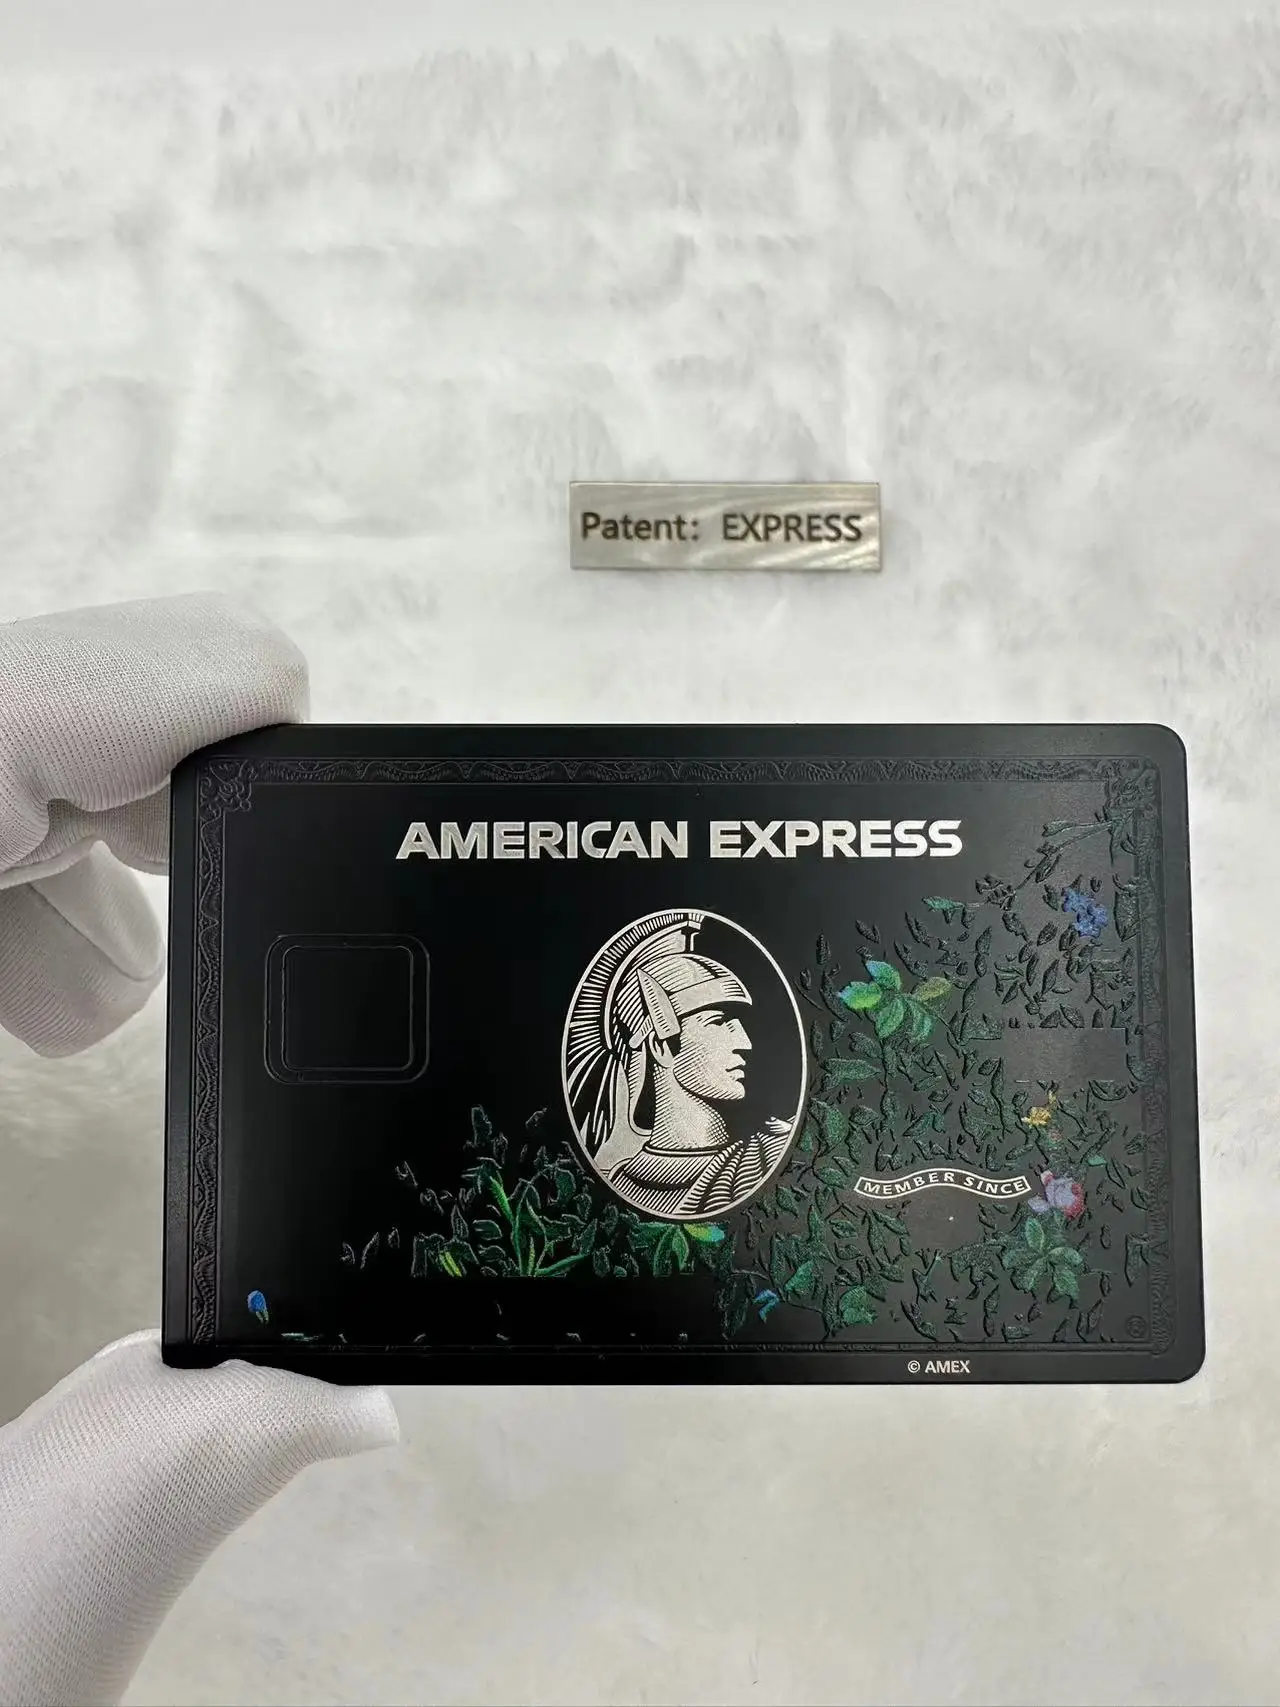 

Custom, Gold Express, Centurion, American Express, Game Cards, Metal Cards, Trade-in cards. Express card